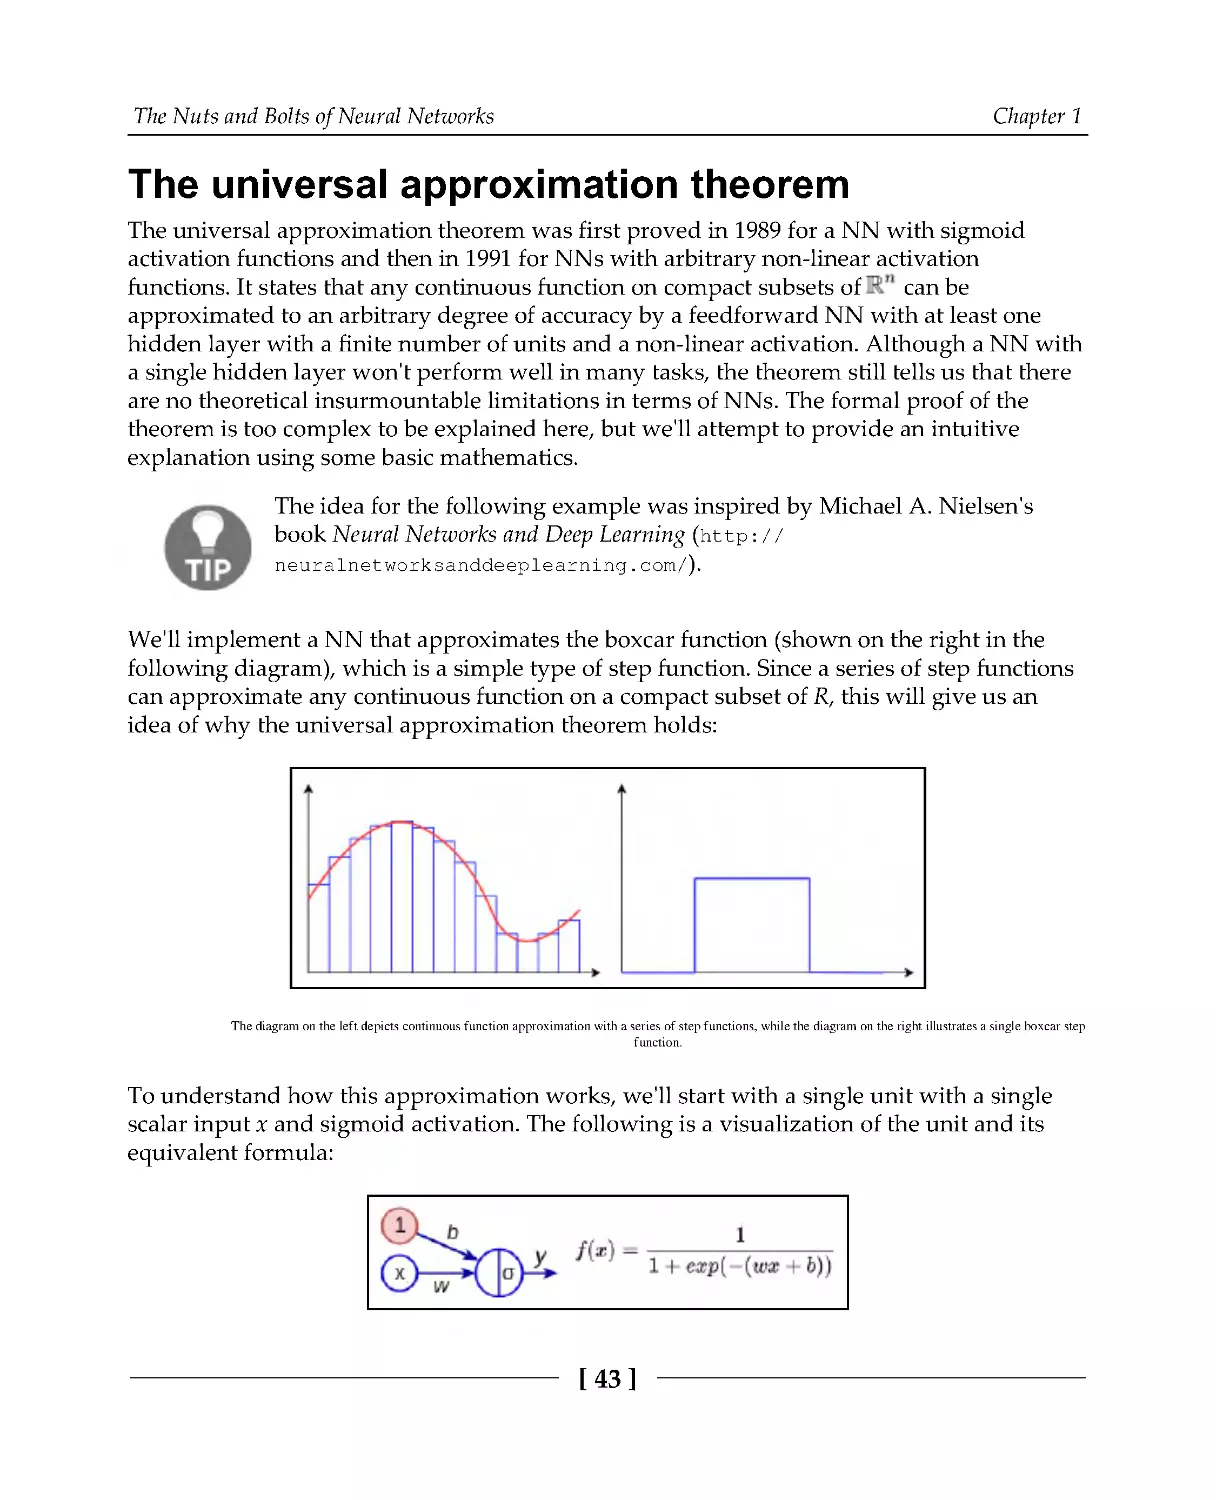 The universal approximation theorem